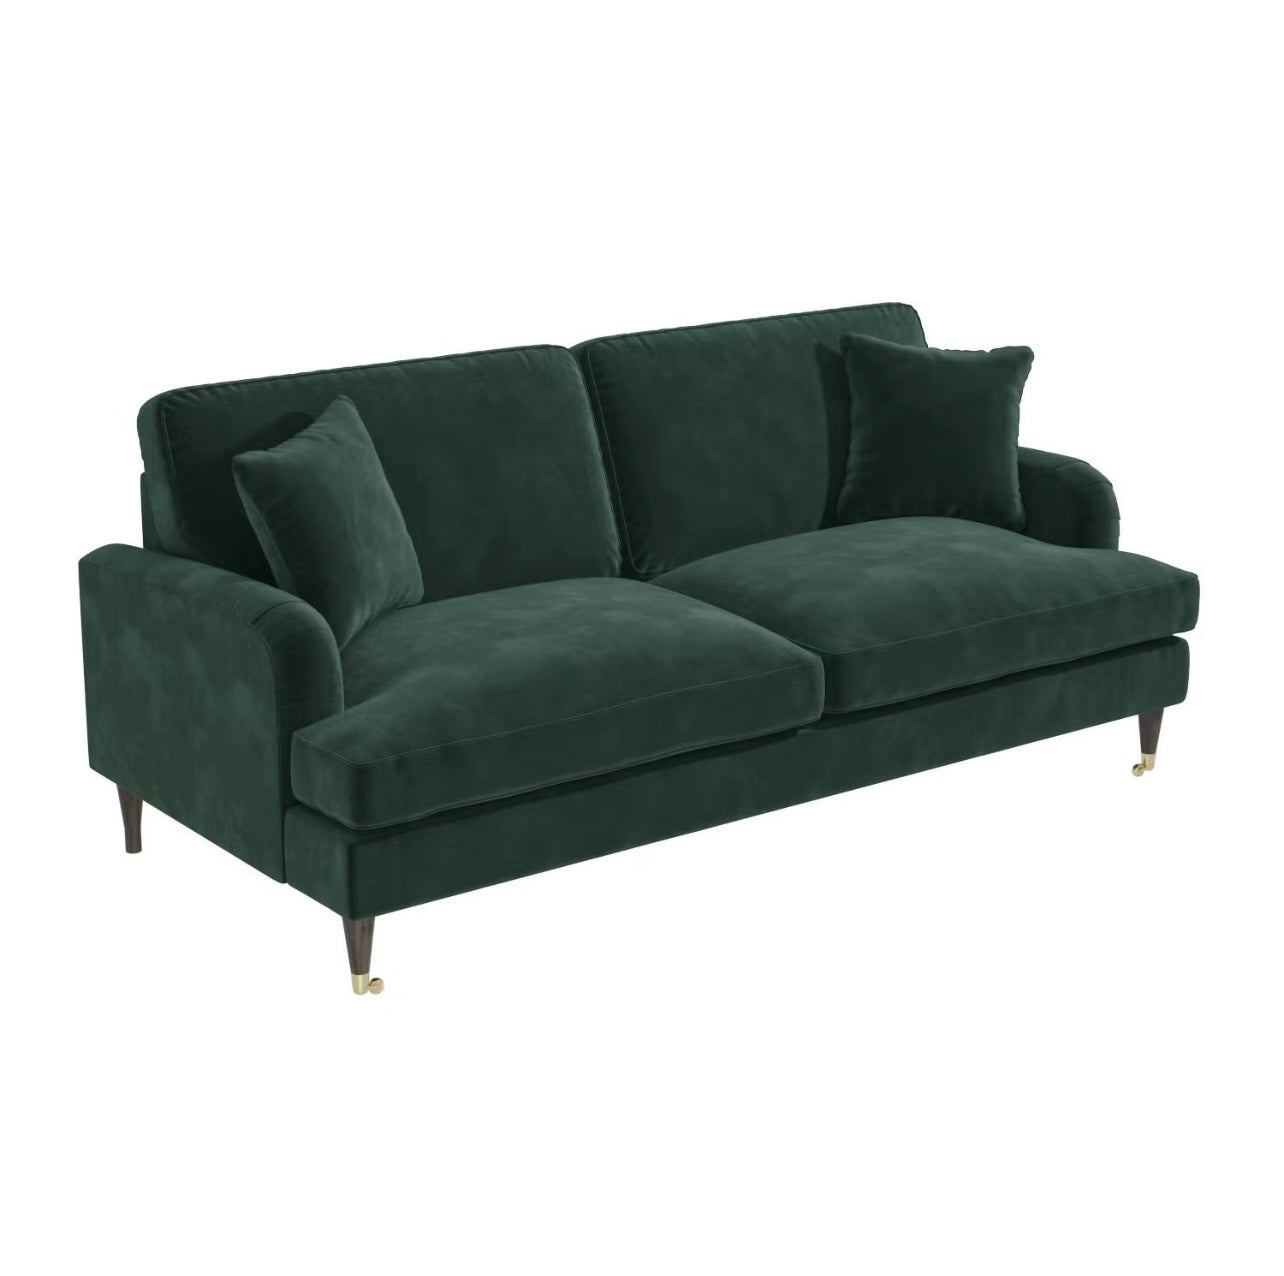 Velvet Sofa 3 Seater in Green with Cushions